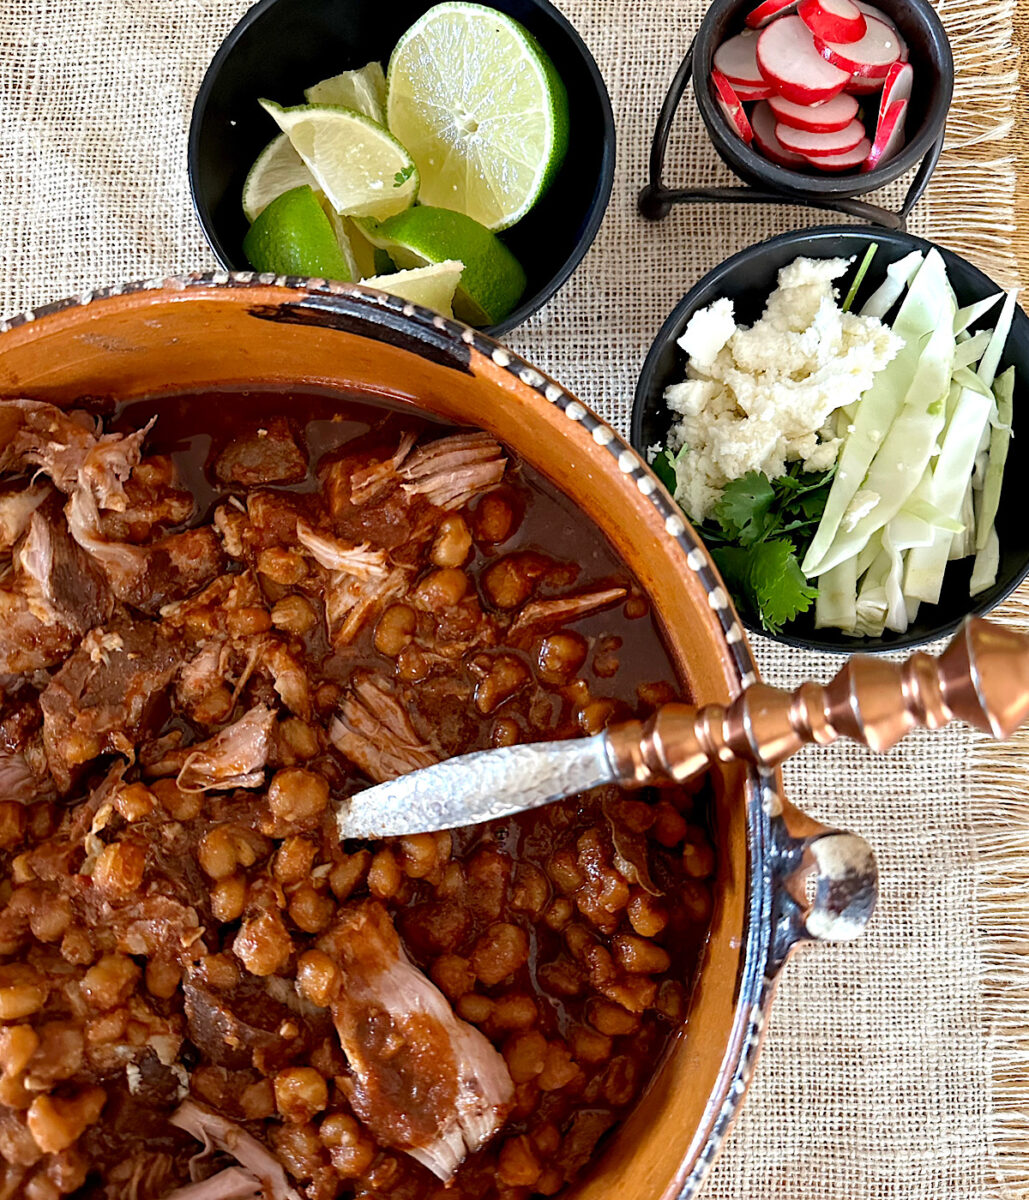 Pork pozole with side garnishes of limes, radishes, cabbage and cheese